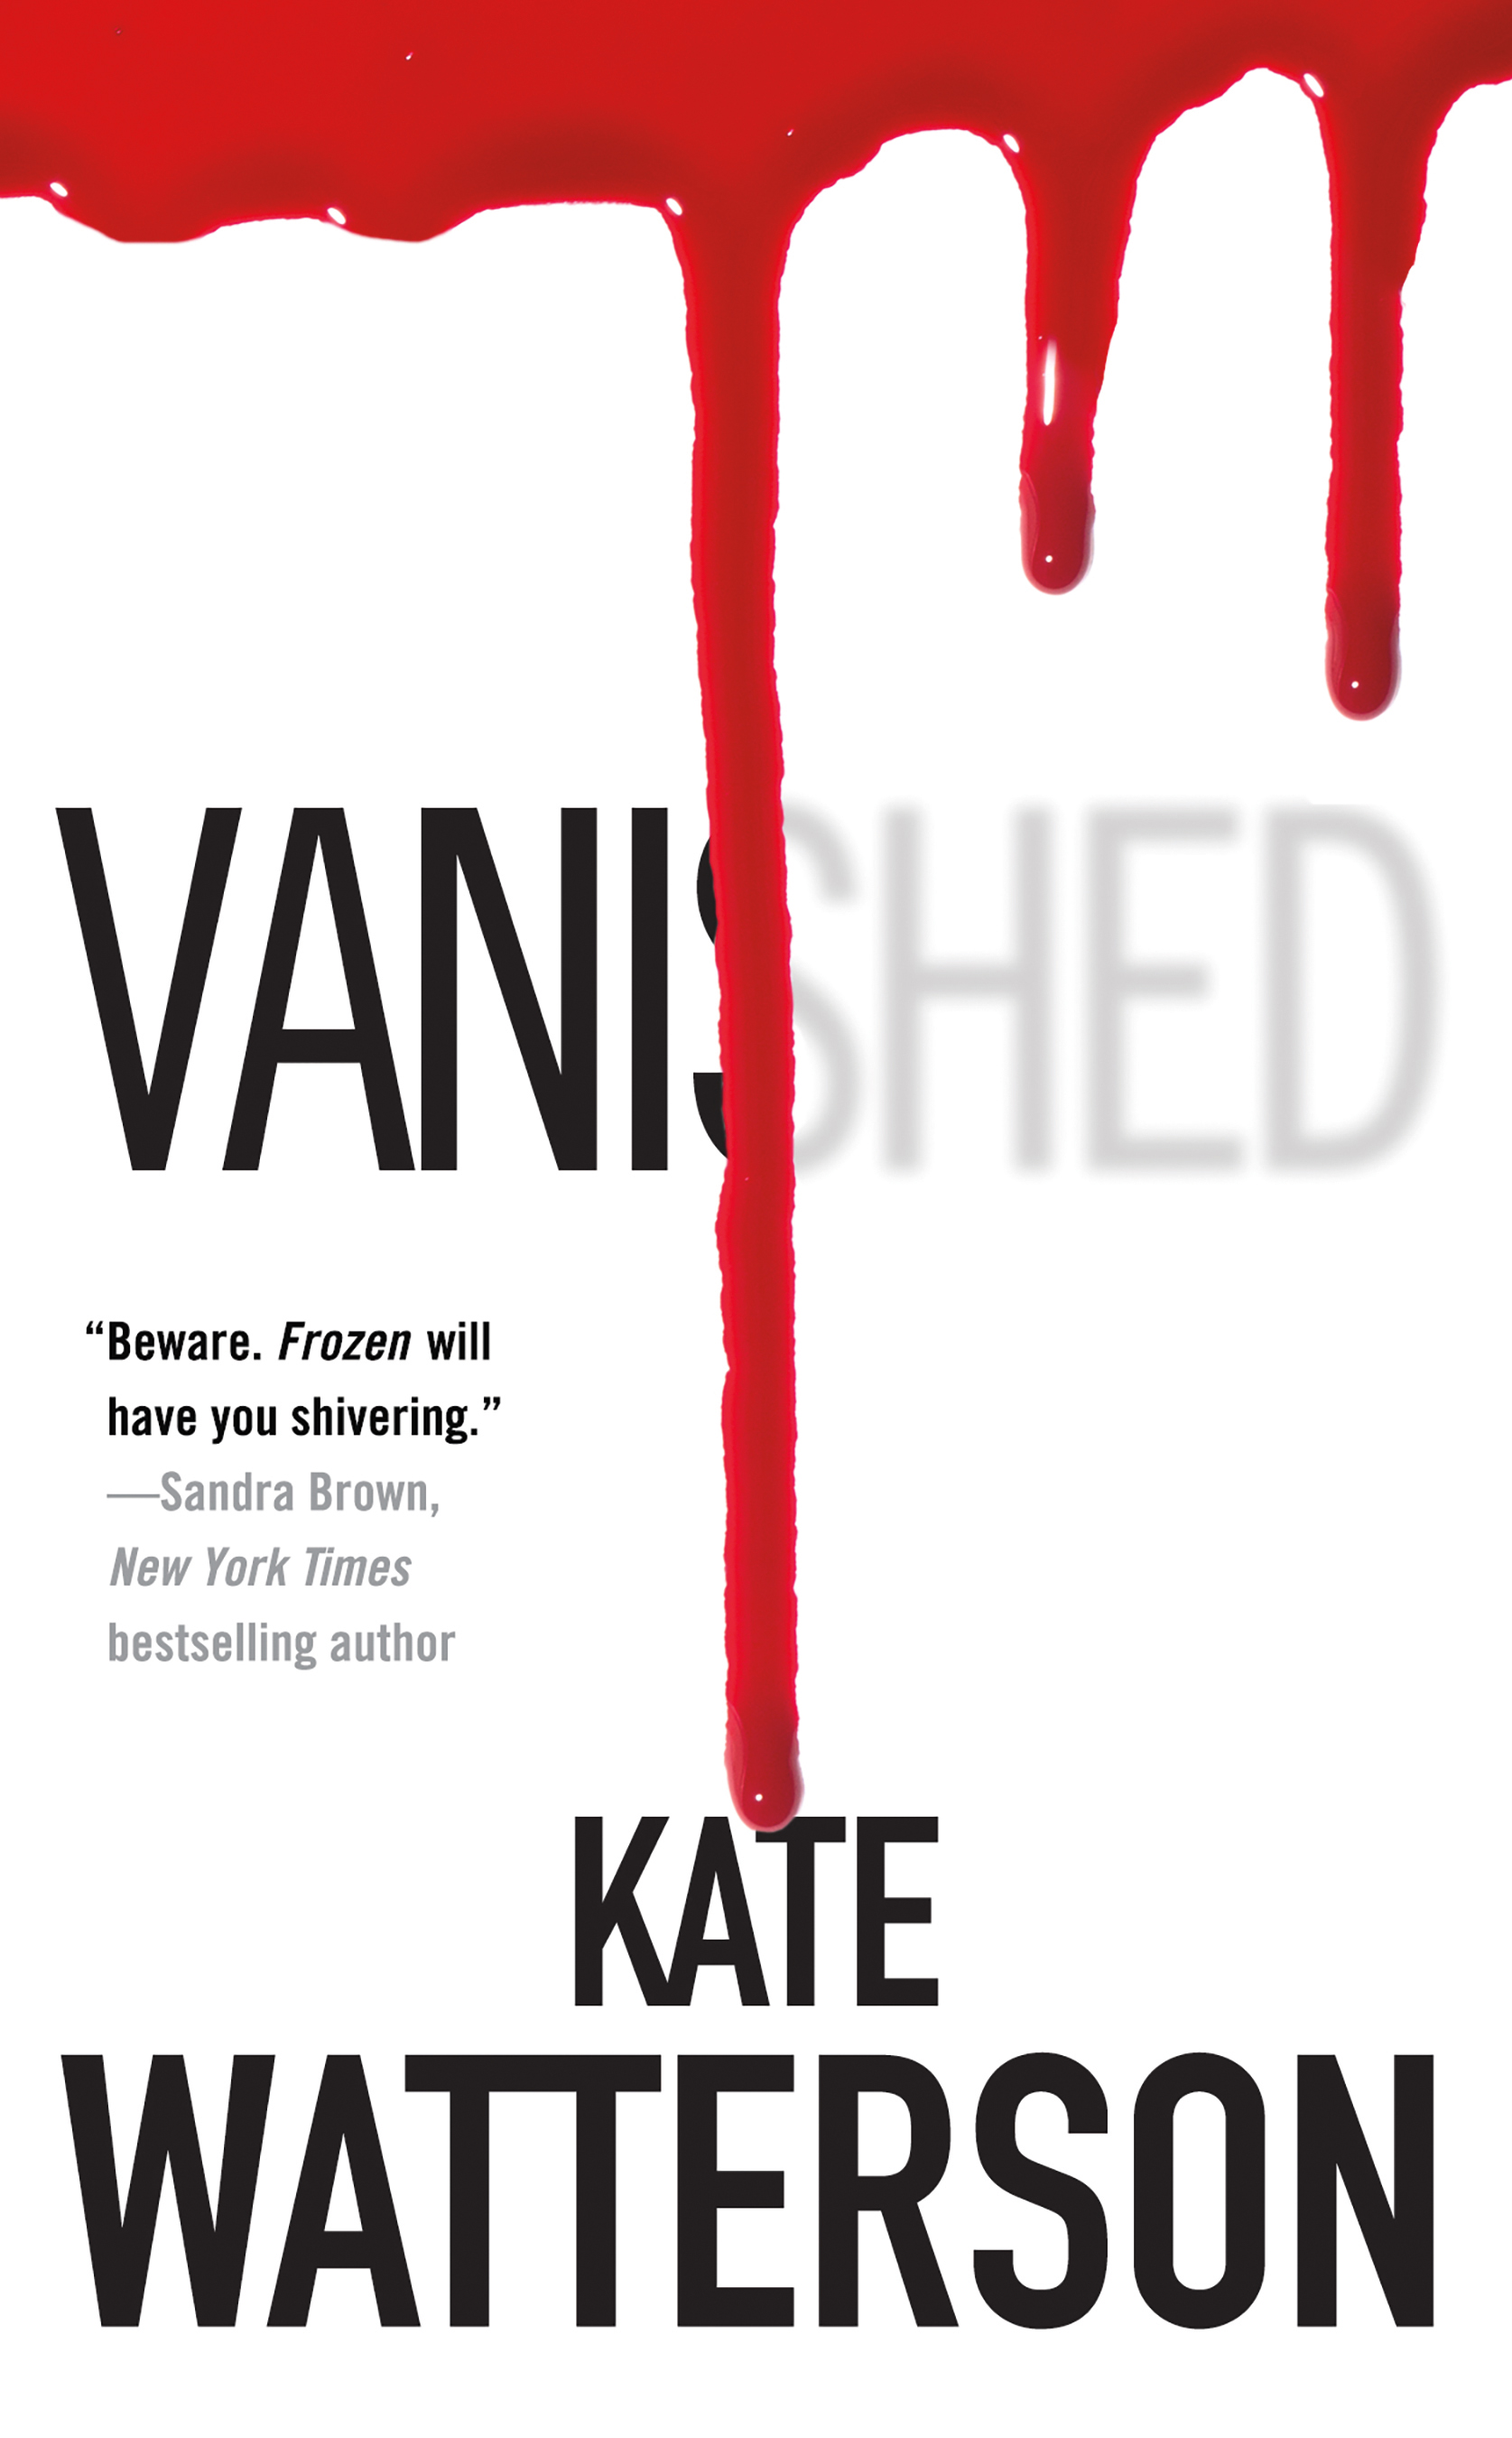 Vanished by Kate Watterson